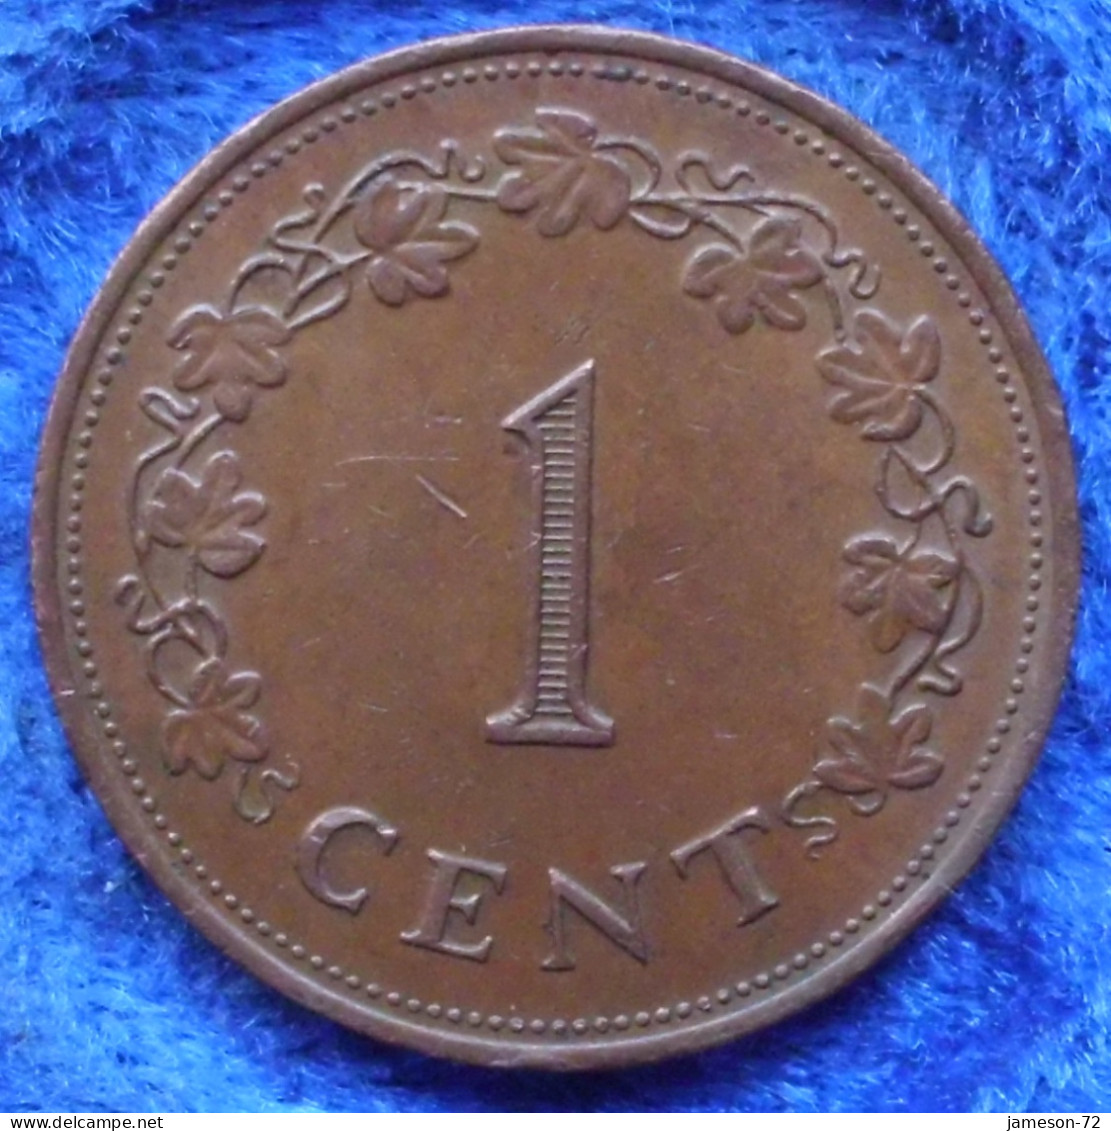 MALTA - 1 Cent 1977 "the George Cross" KM# 8 Republic Since 1964 (recognized 1974) - Edelweiss Coins - Malte